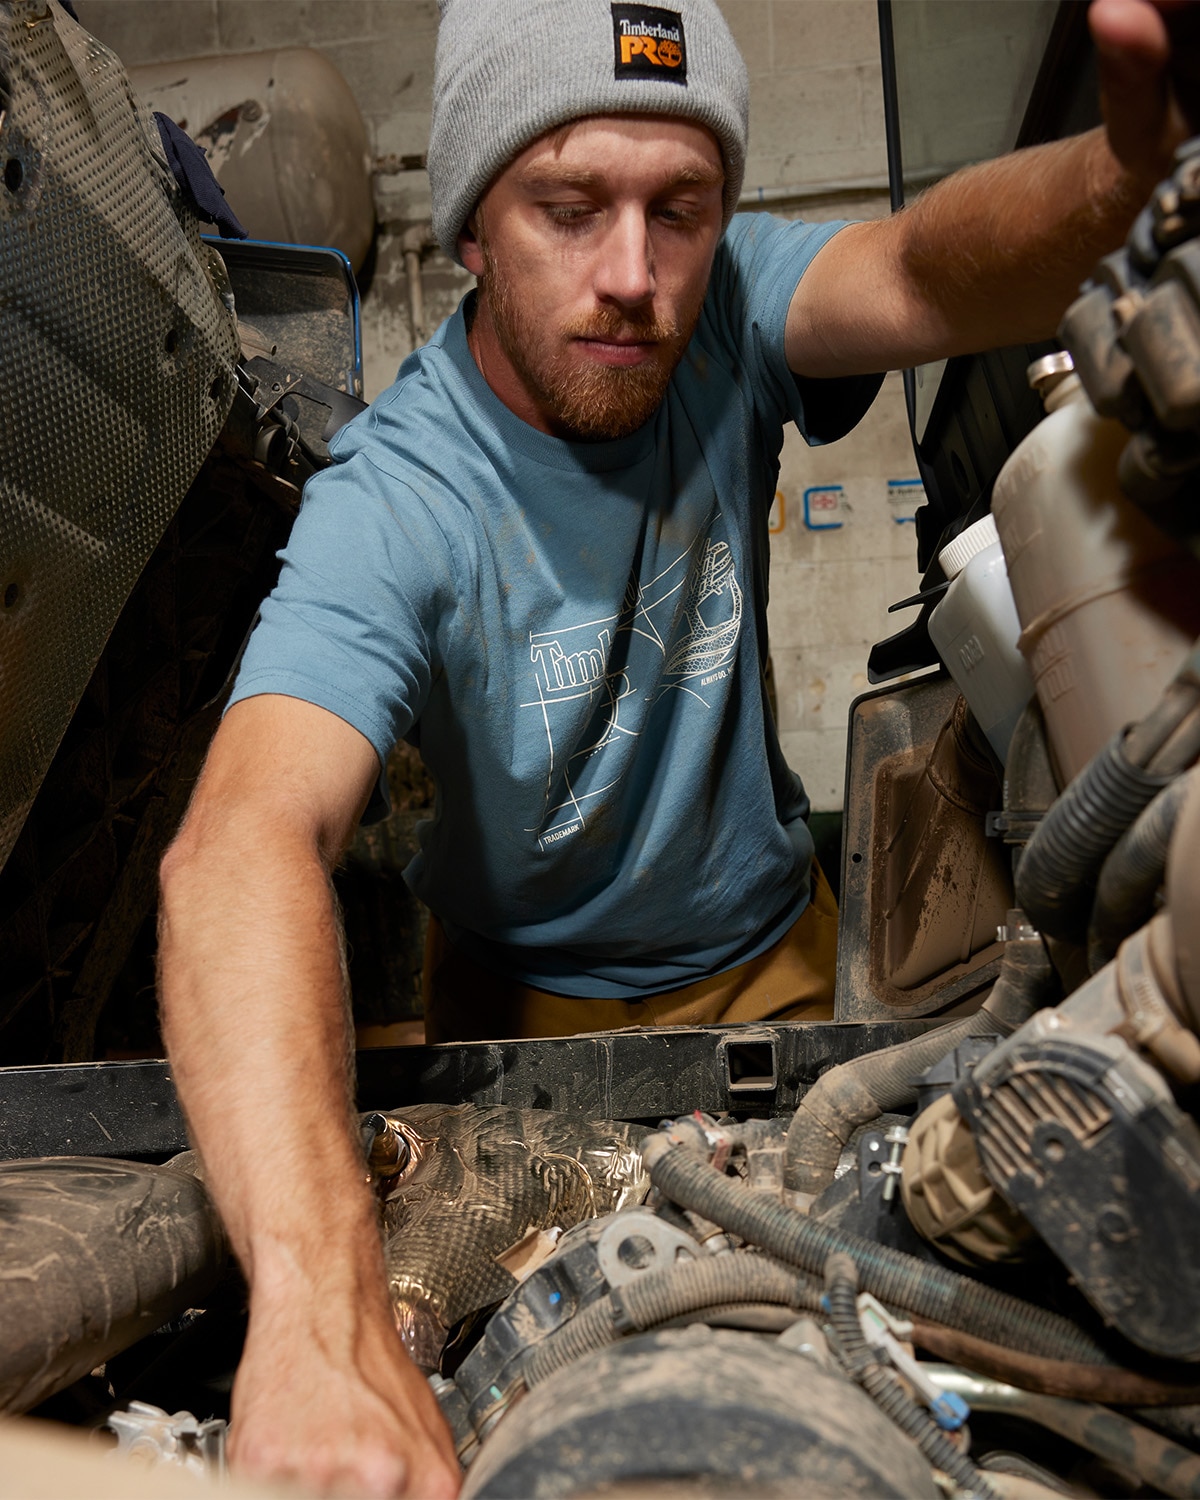 image of a man wearing a gray beanie and a blue t-shirt working on a car